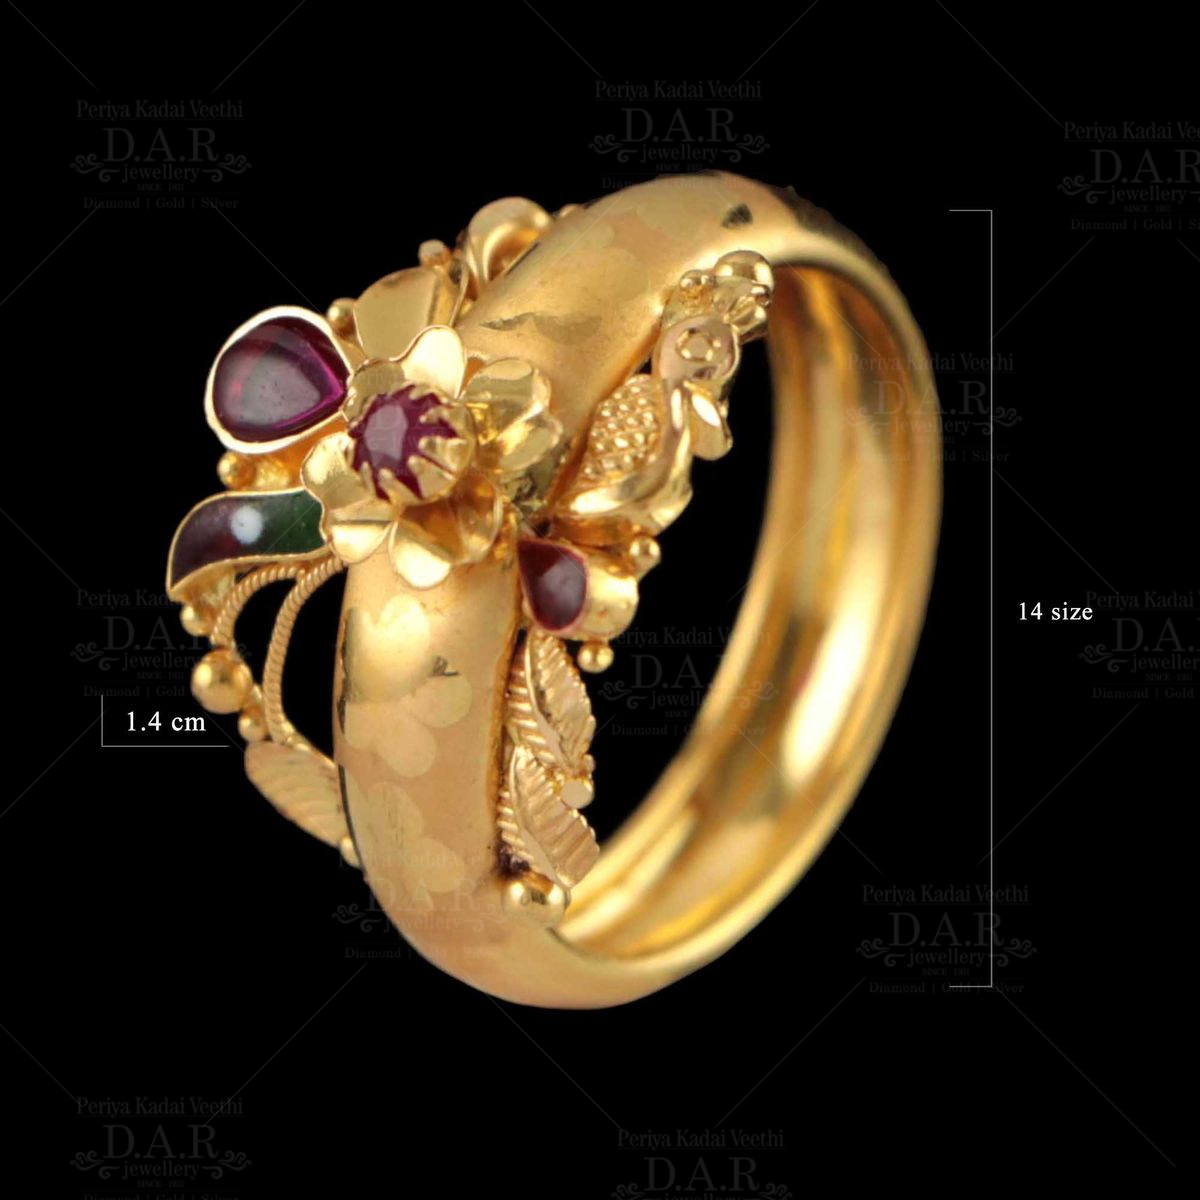 Buy Rings & Bands online in Surat for best prices.